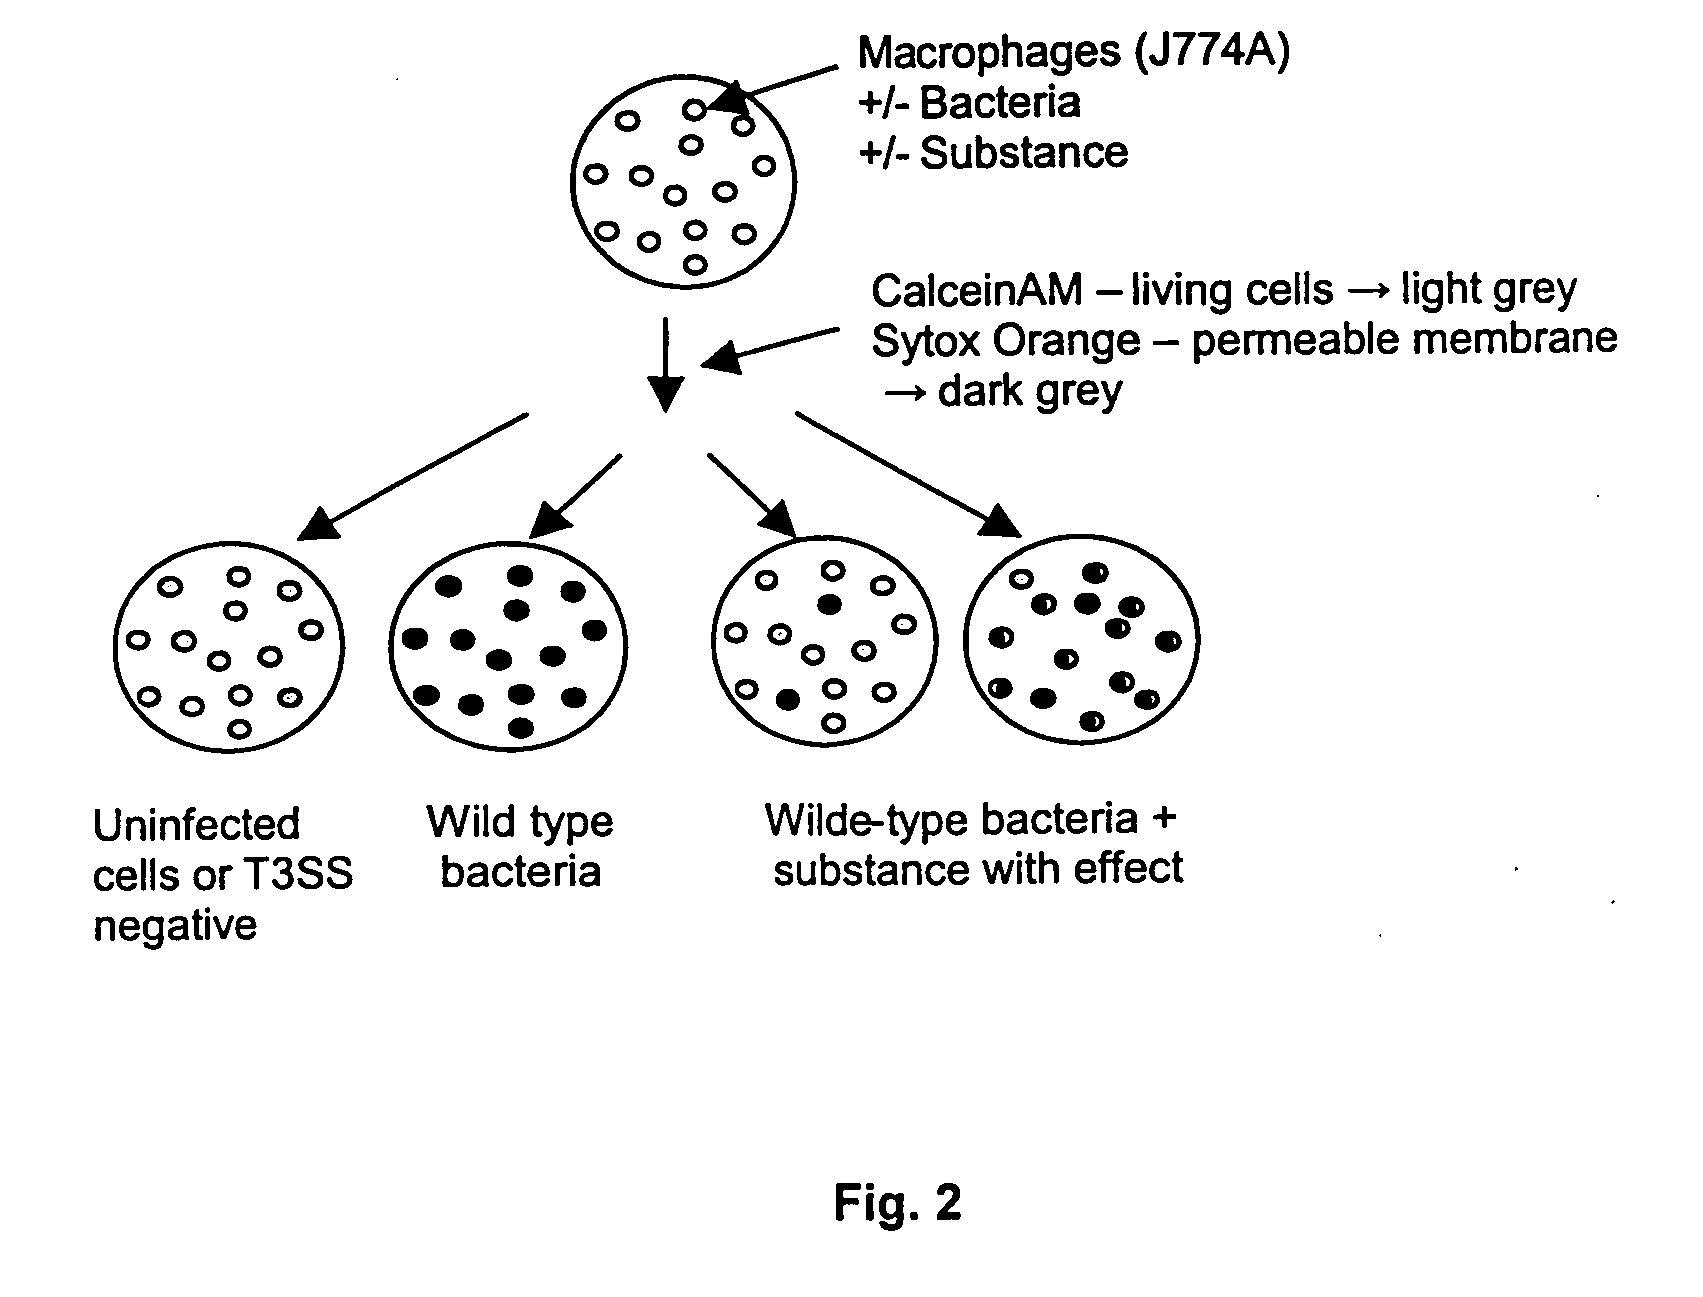 Method and means for preventing and inhibiting type iii secretion in infections caused by gram-negative bacteria